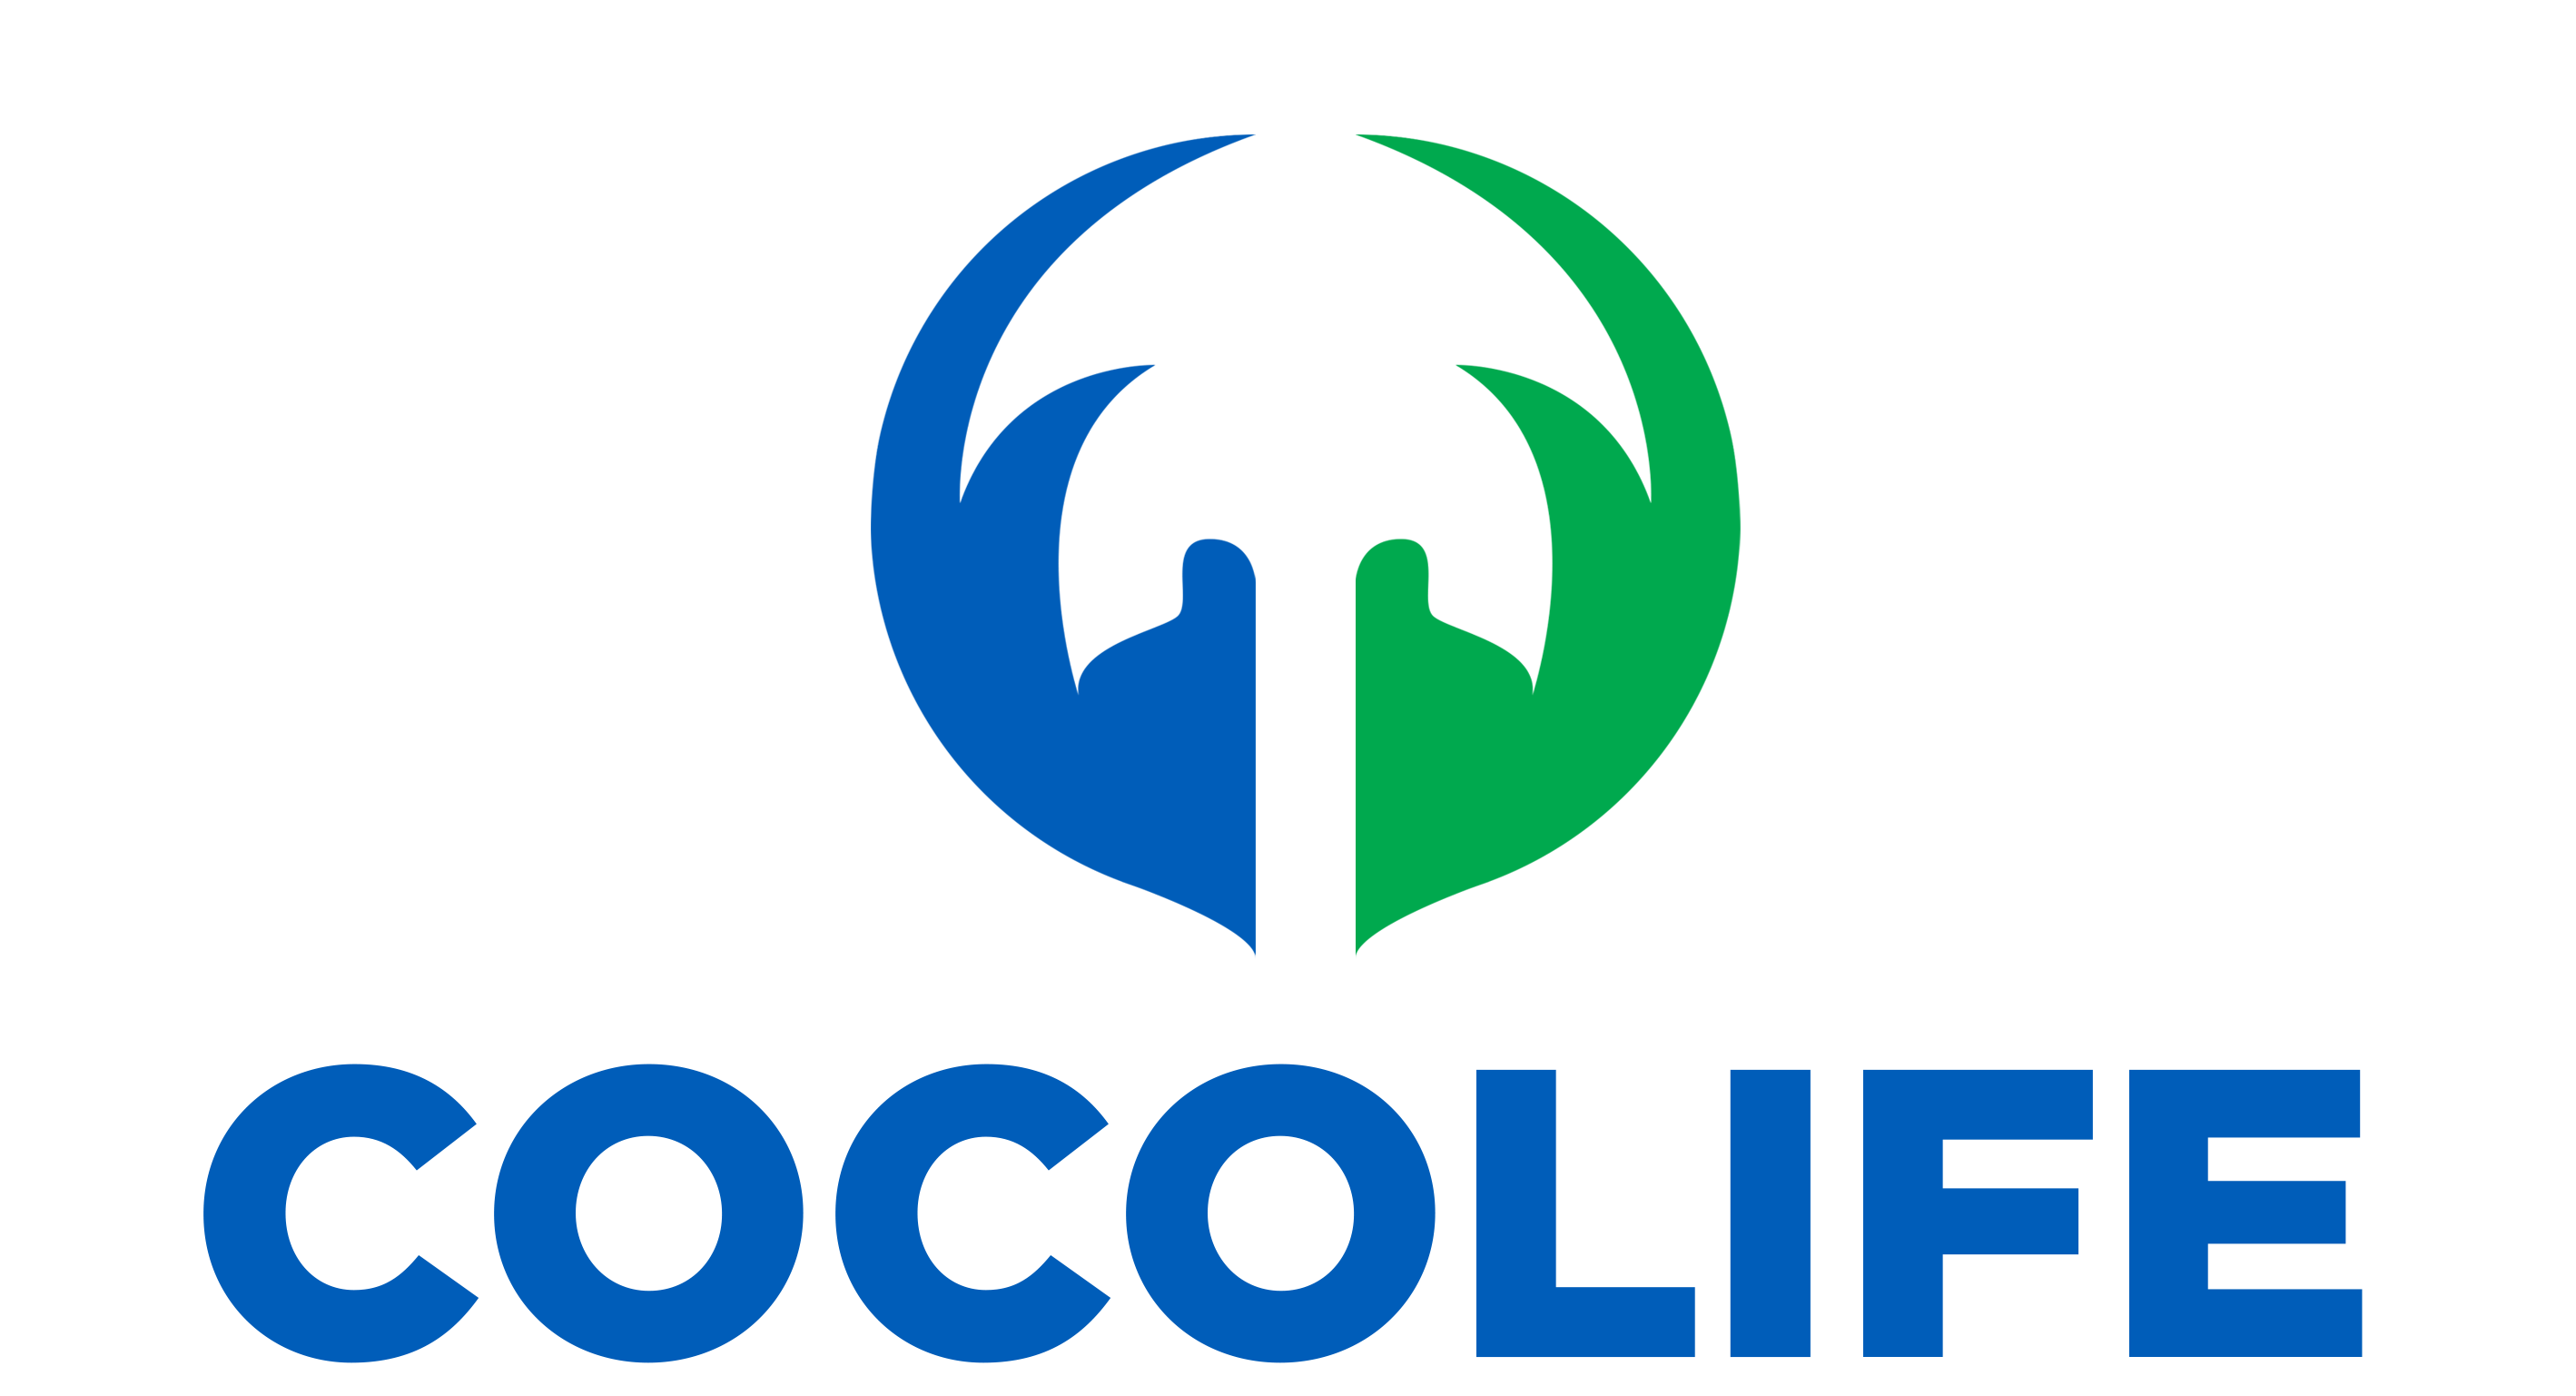 United Coconut Planters Life Assurance Corp. (COCOLIFE)